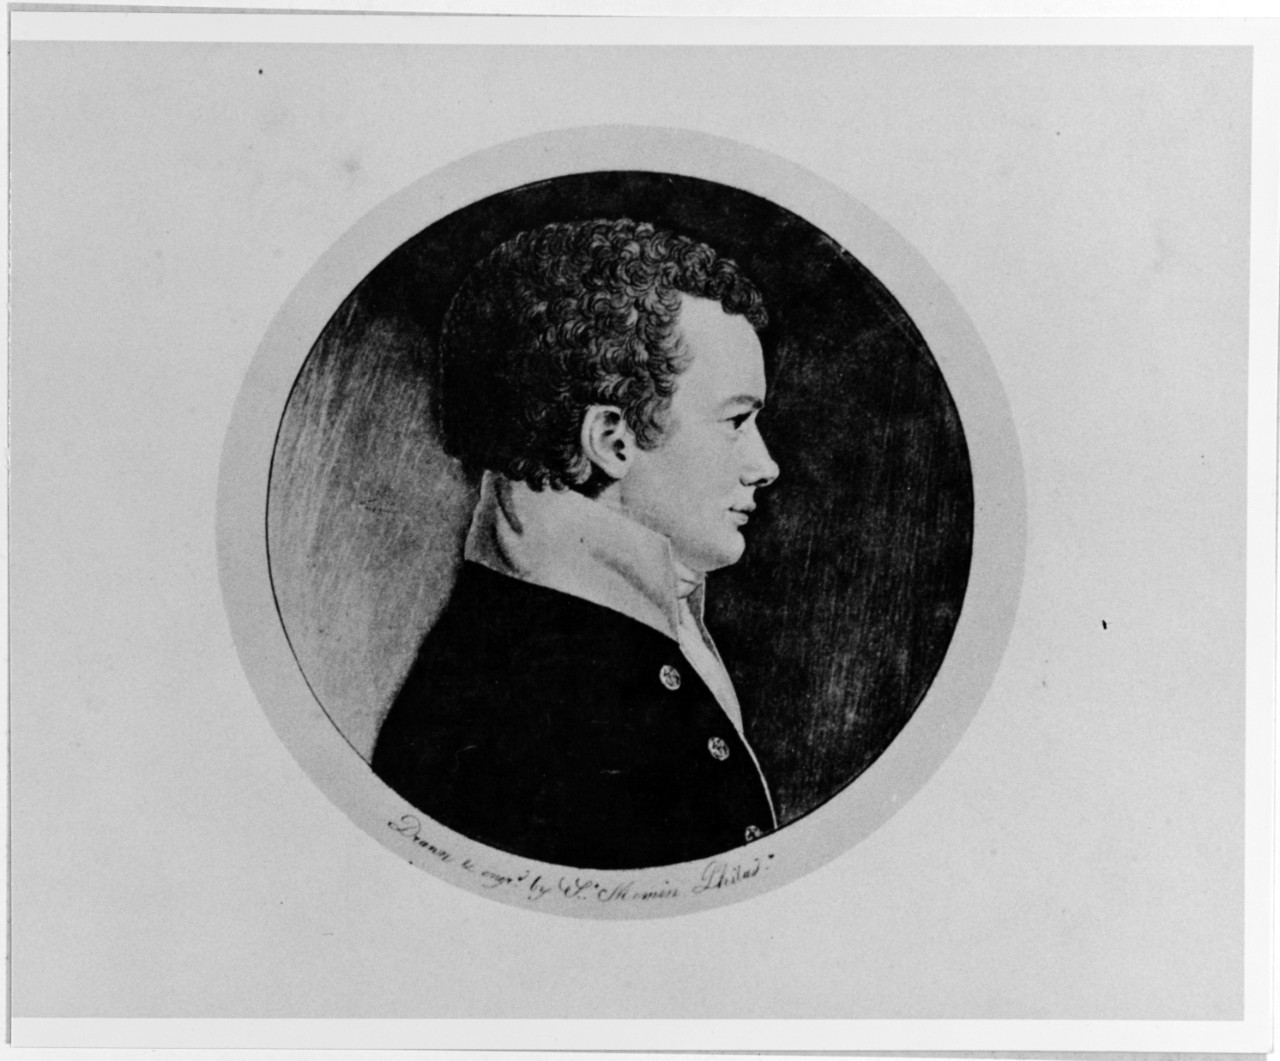 Midshipman James R. Caldwell, engraved portrait by Charles Ste. Memin of Philadelphia, 1799. (Naval History and Heritage Command Photograph NH 51575)